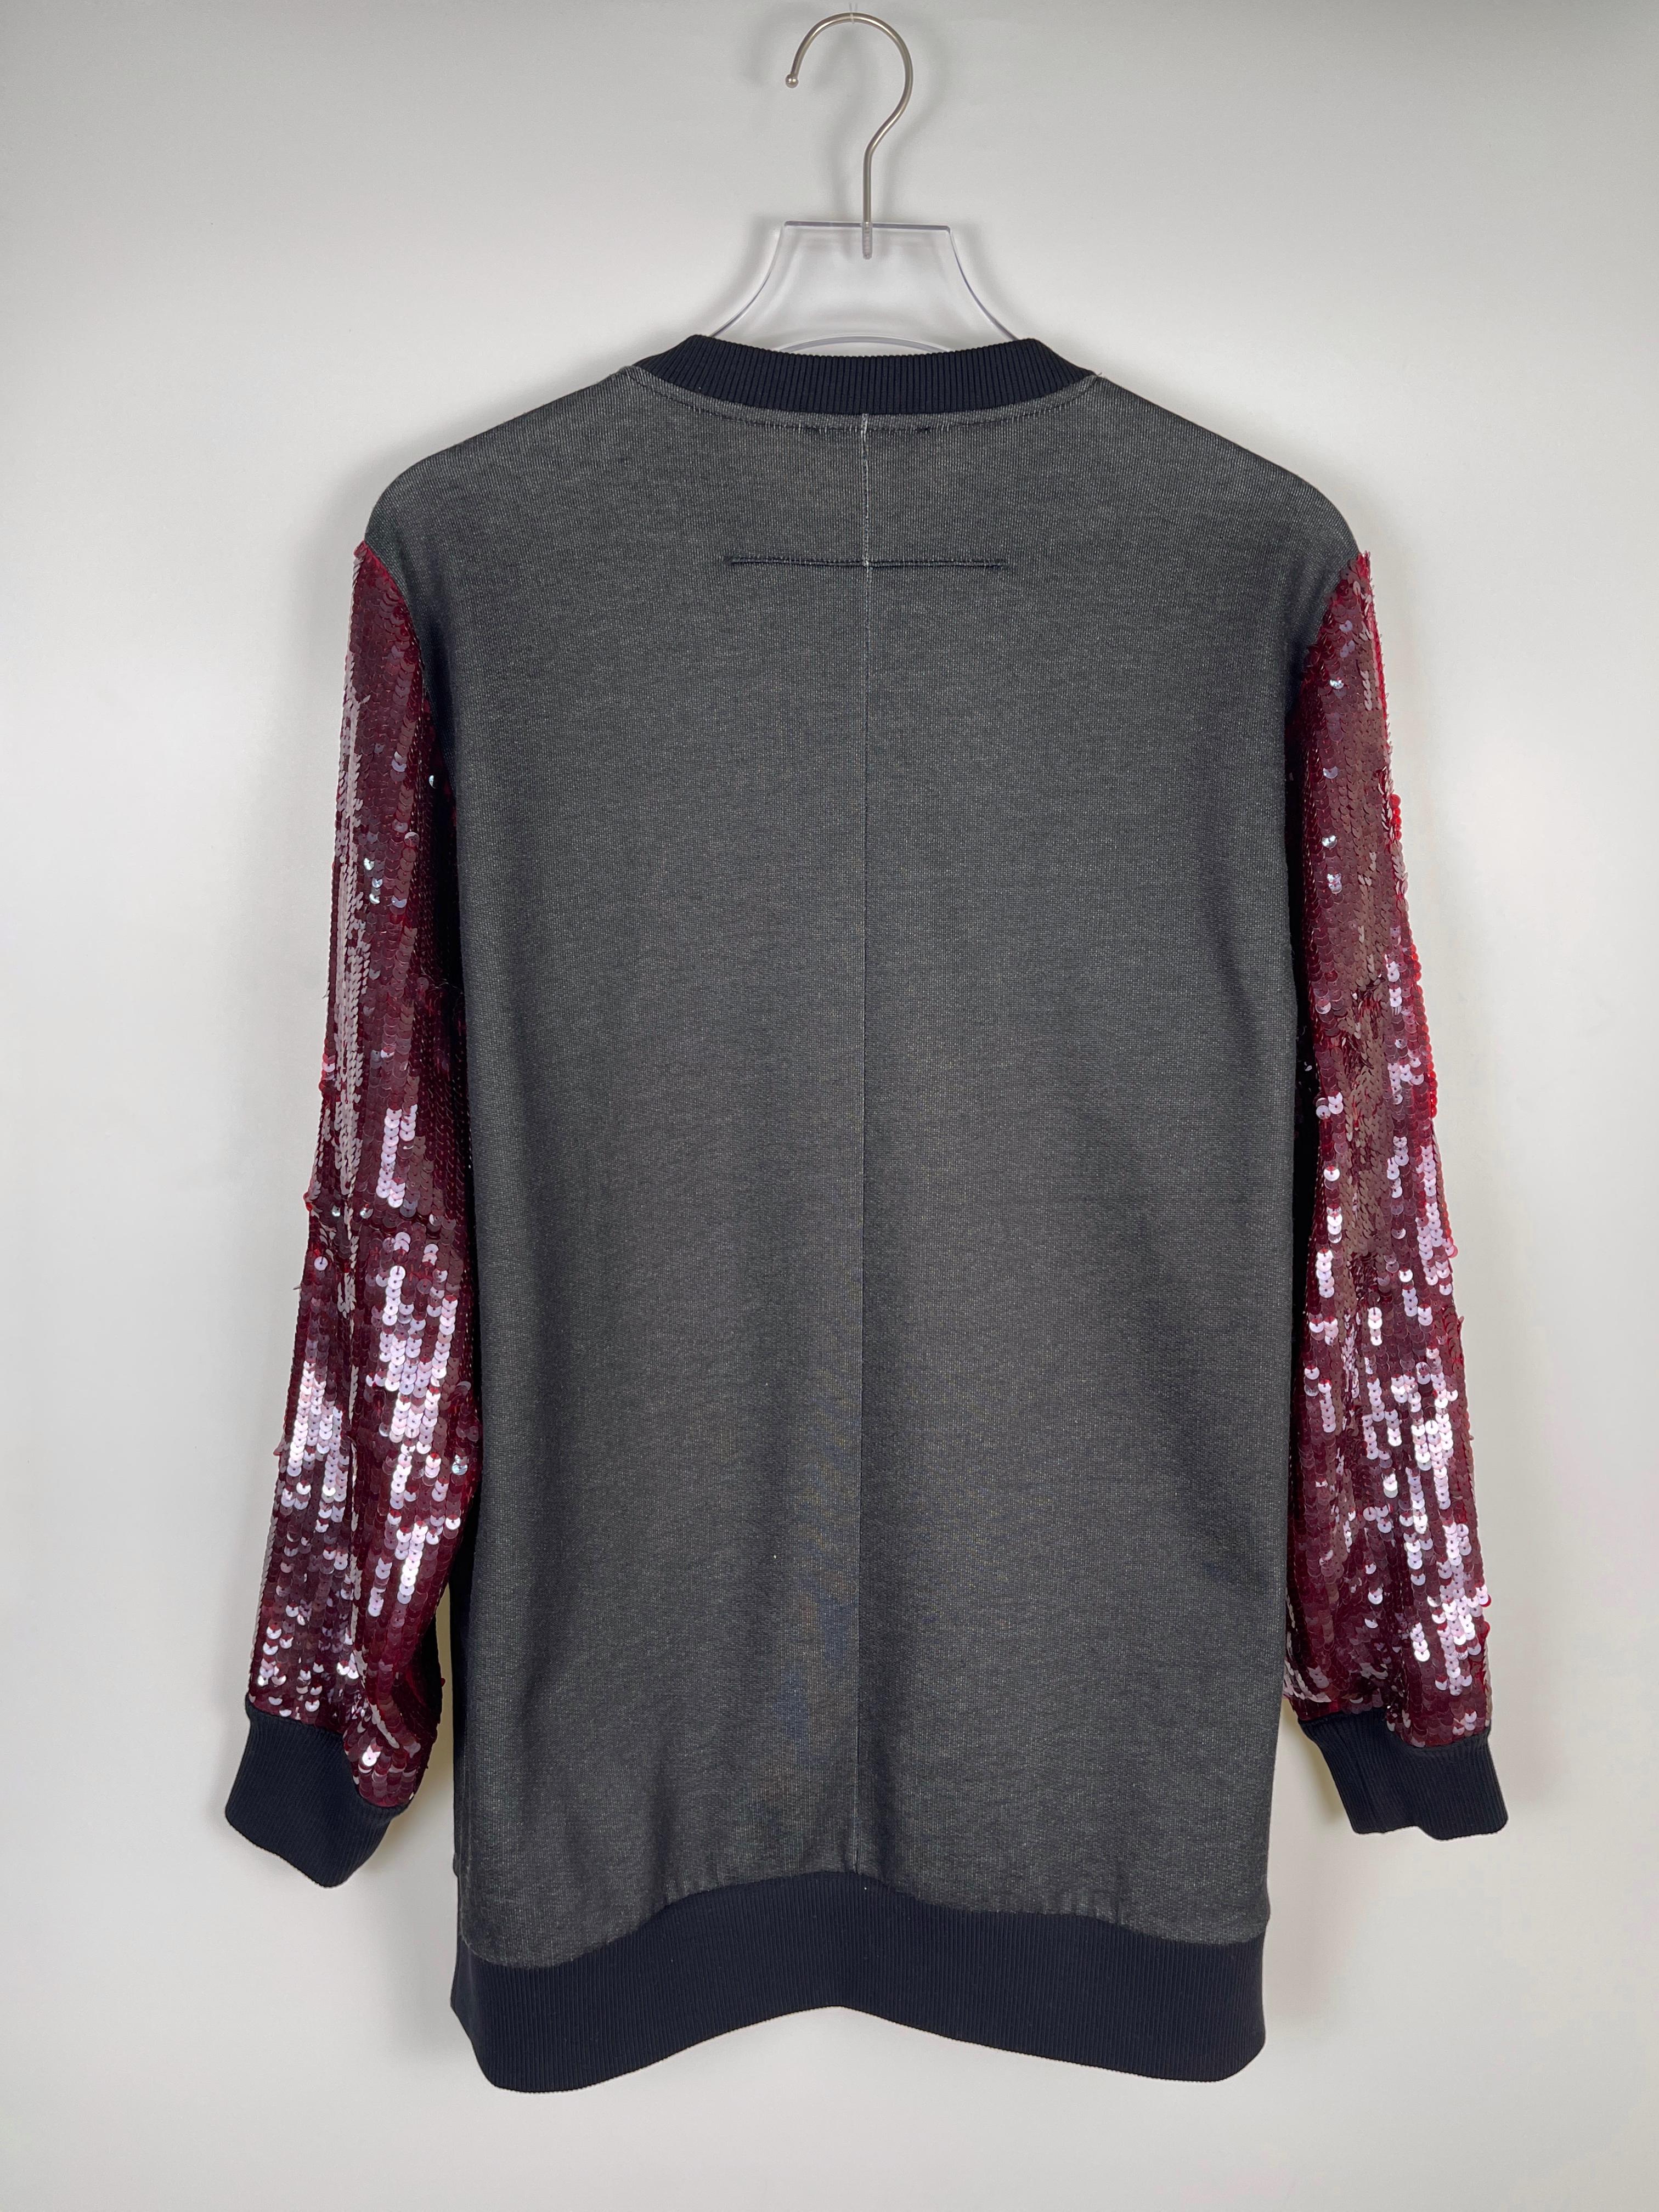 Women's or Men's Givenchy F/W2013 Sequinn Ecstasy Sweatshirt For Sale